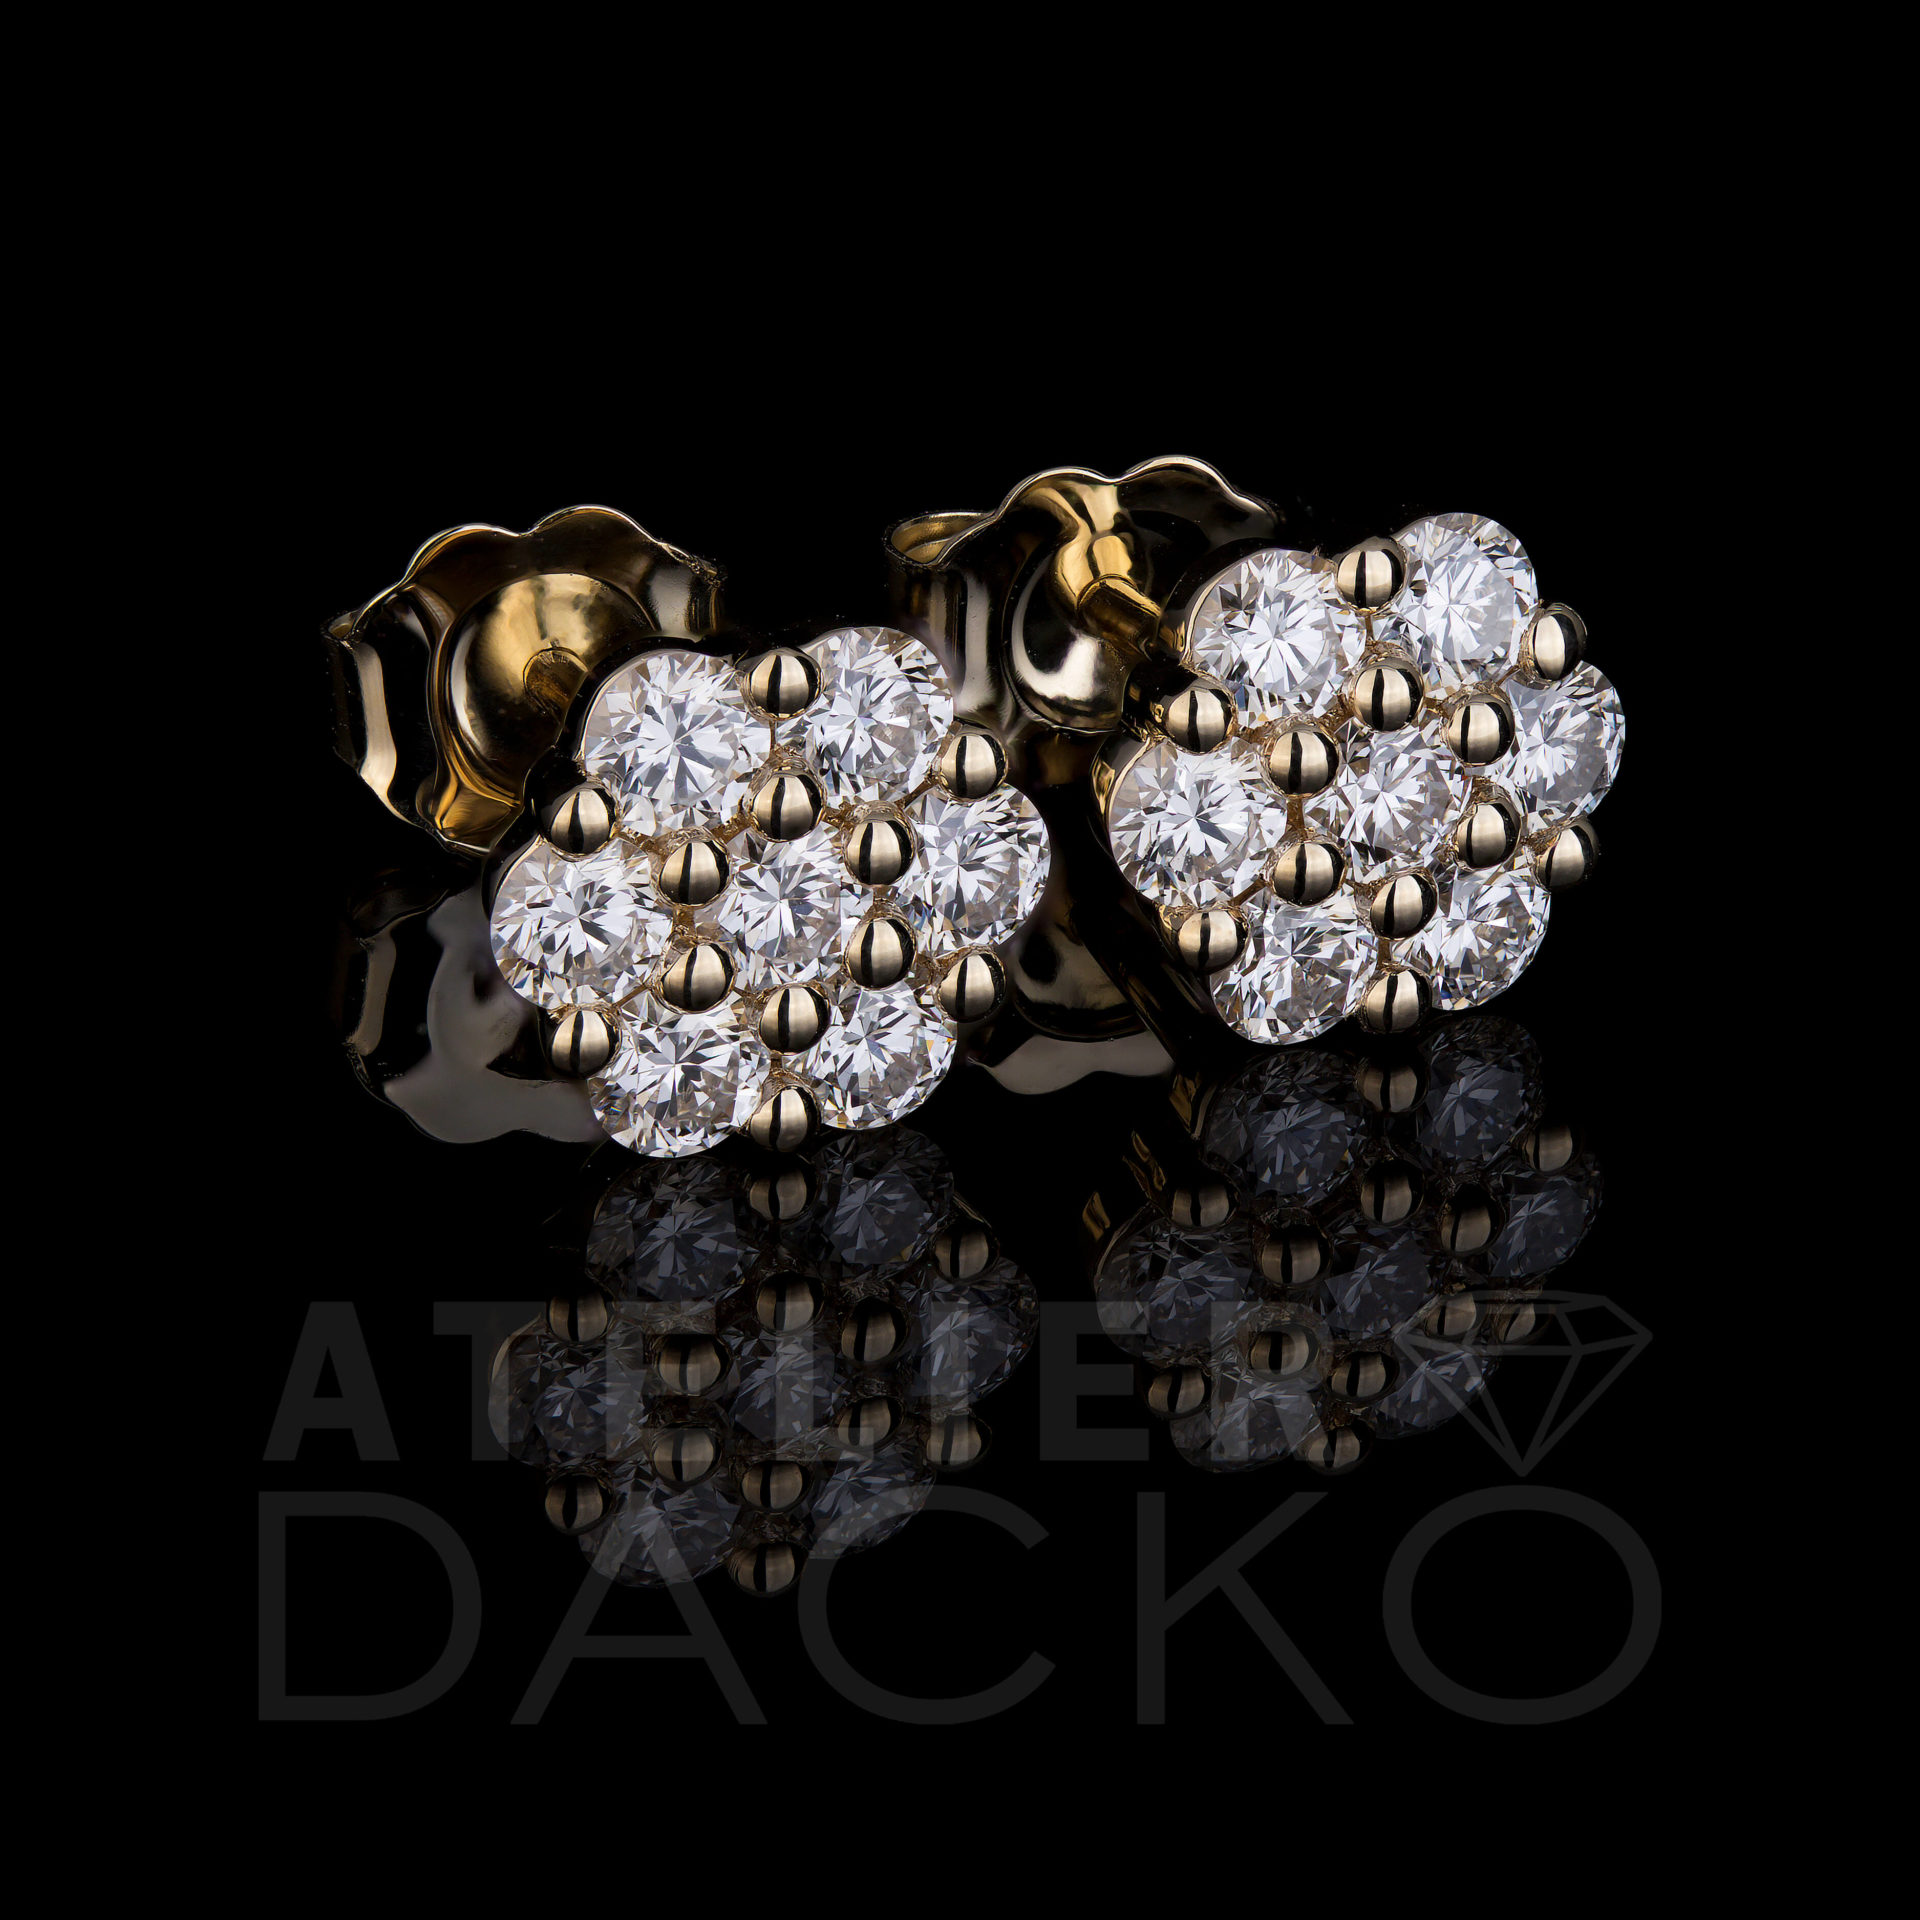 Front Facing Honeycomb Diamond Cluster Earrings